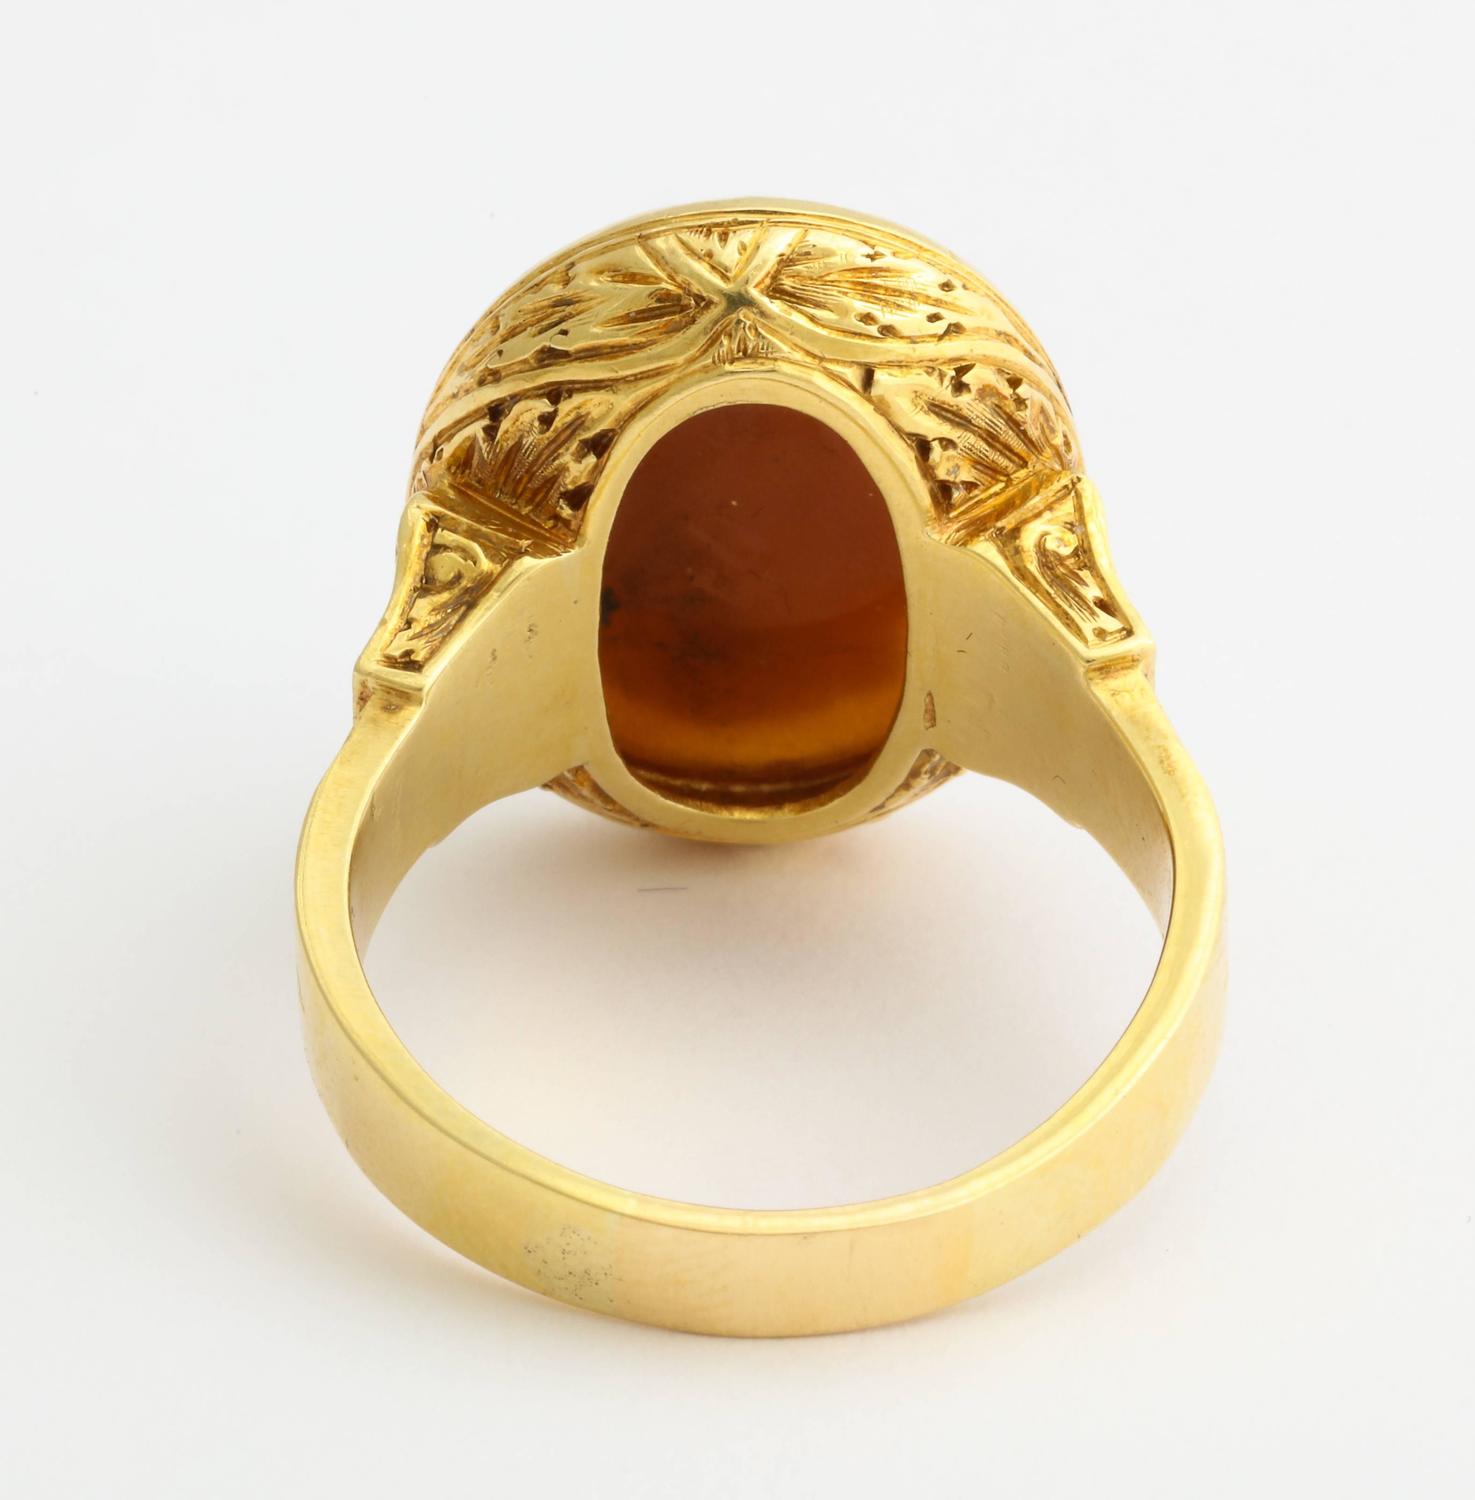 Antique Classical Greek Cameo Gold Ring For Sale at 1stdibs